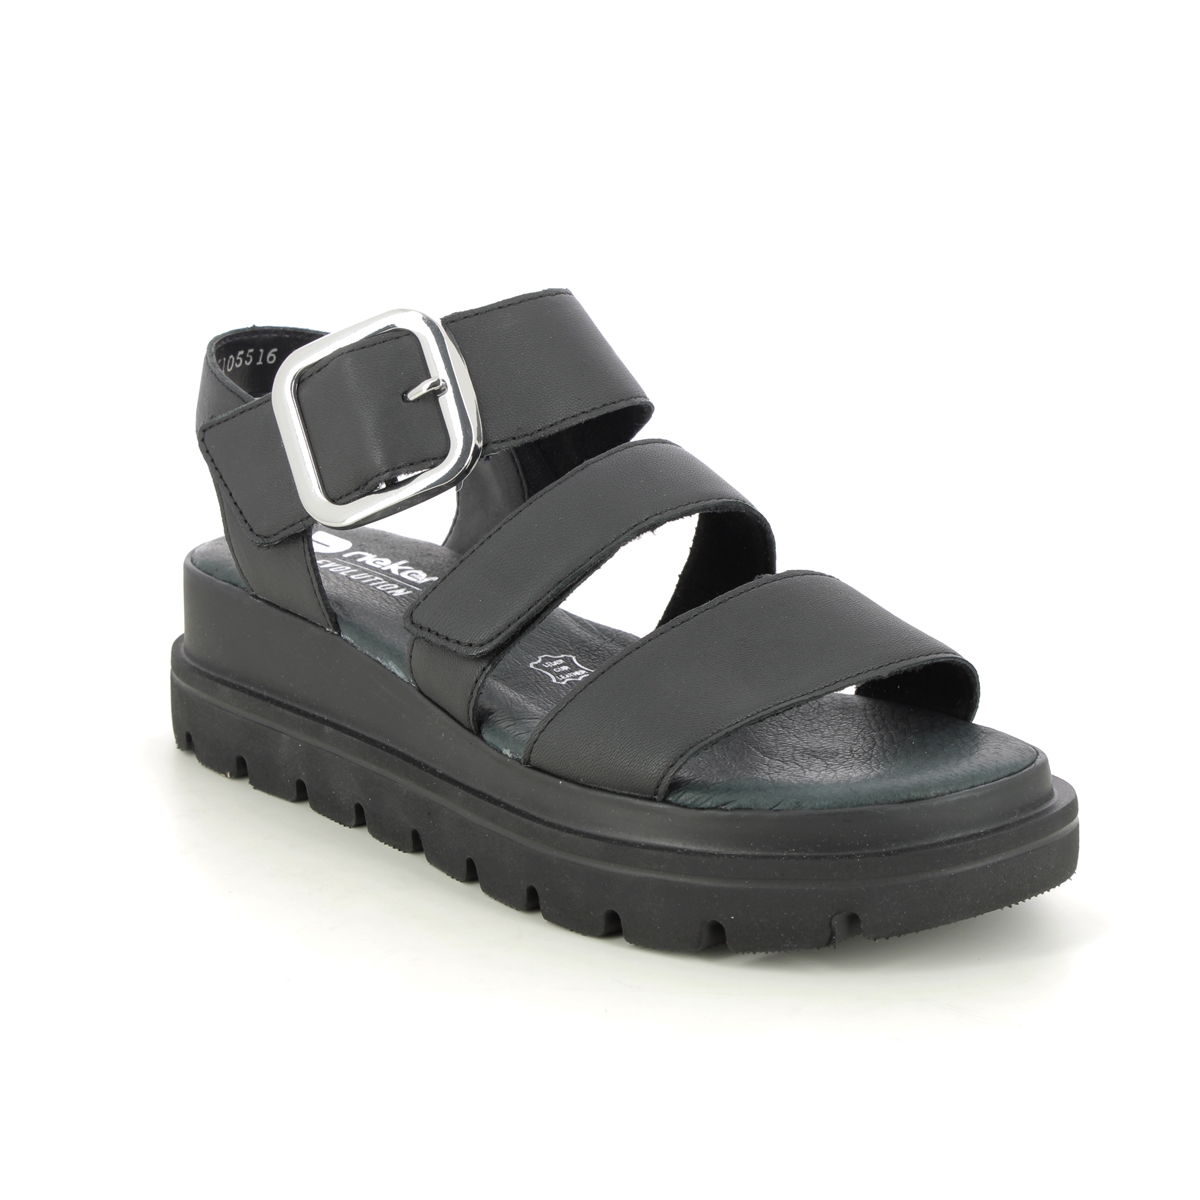 Rieker W1650-00 Black leather Womens Wedge Sandals in a Plain Leather in Size 36